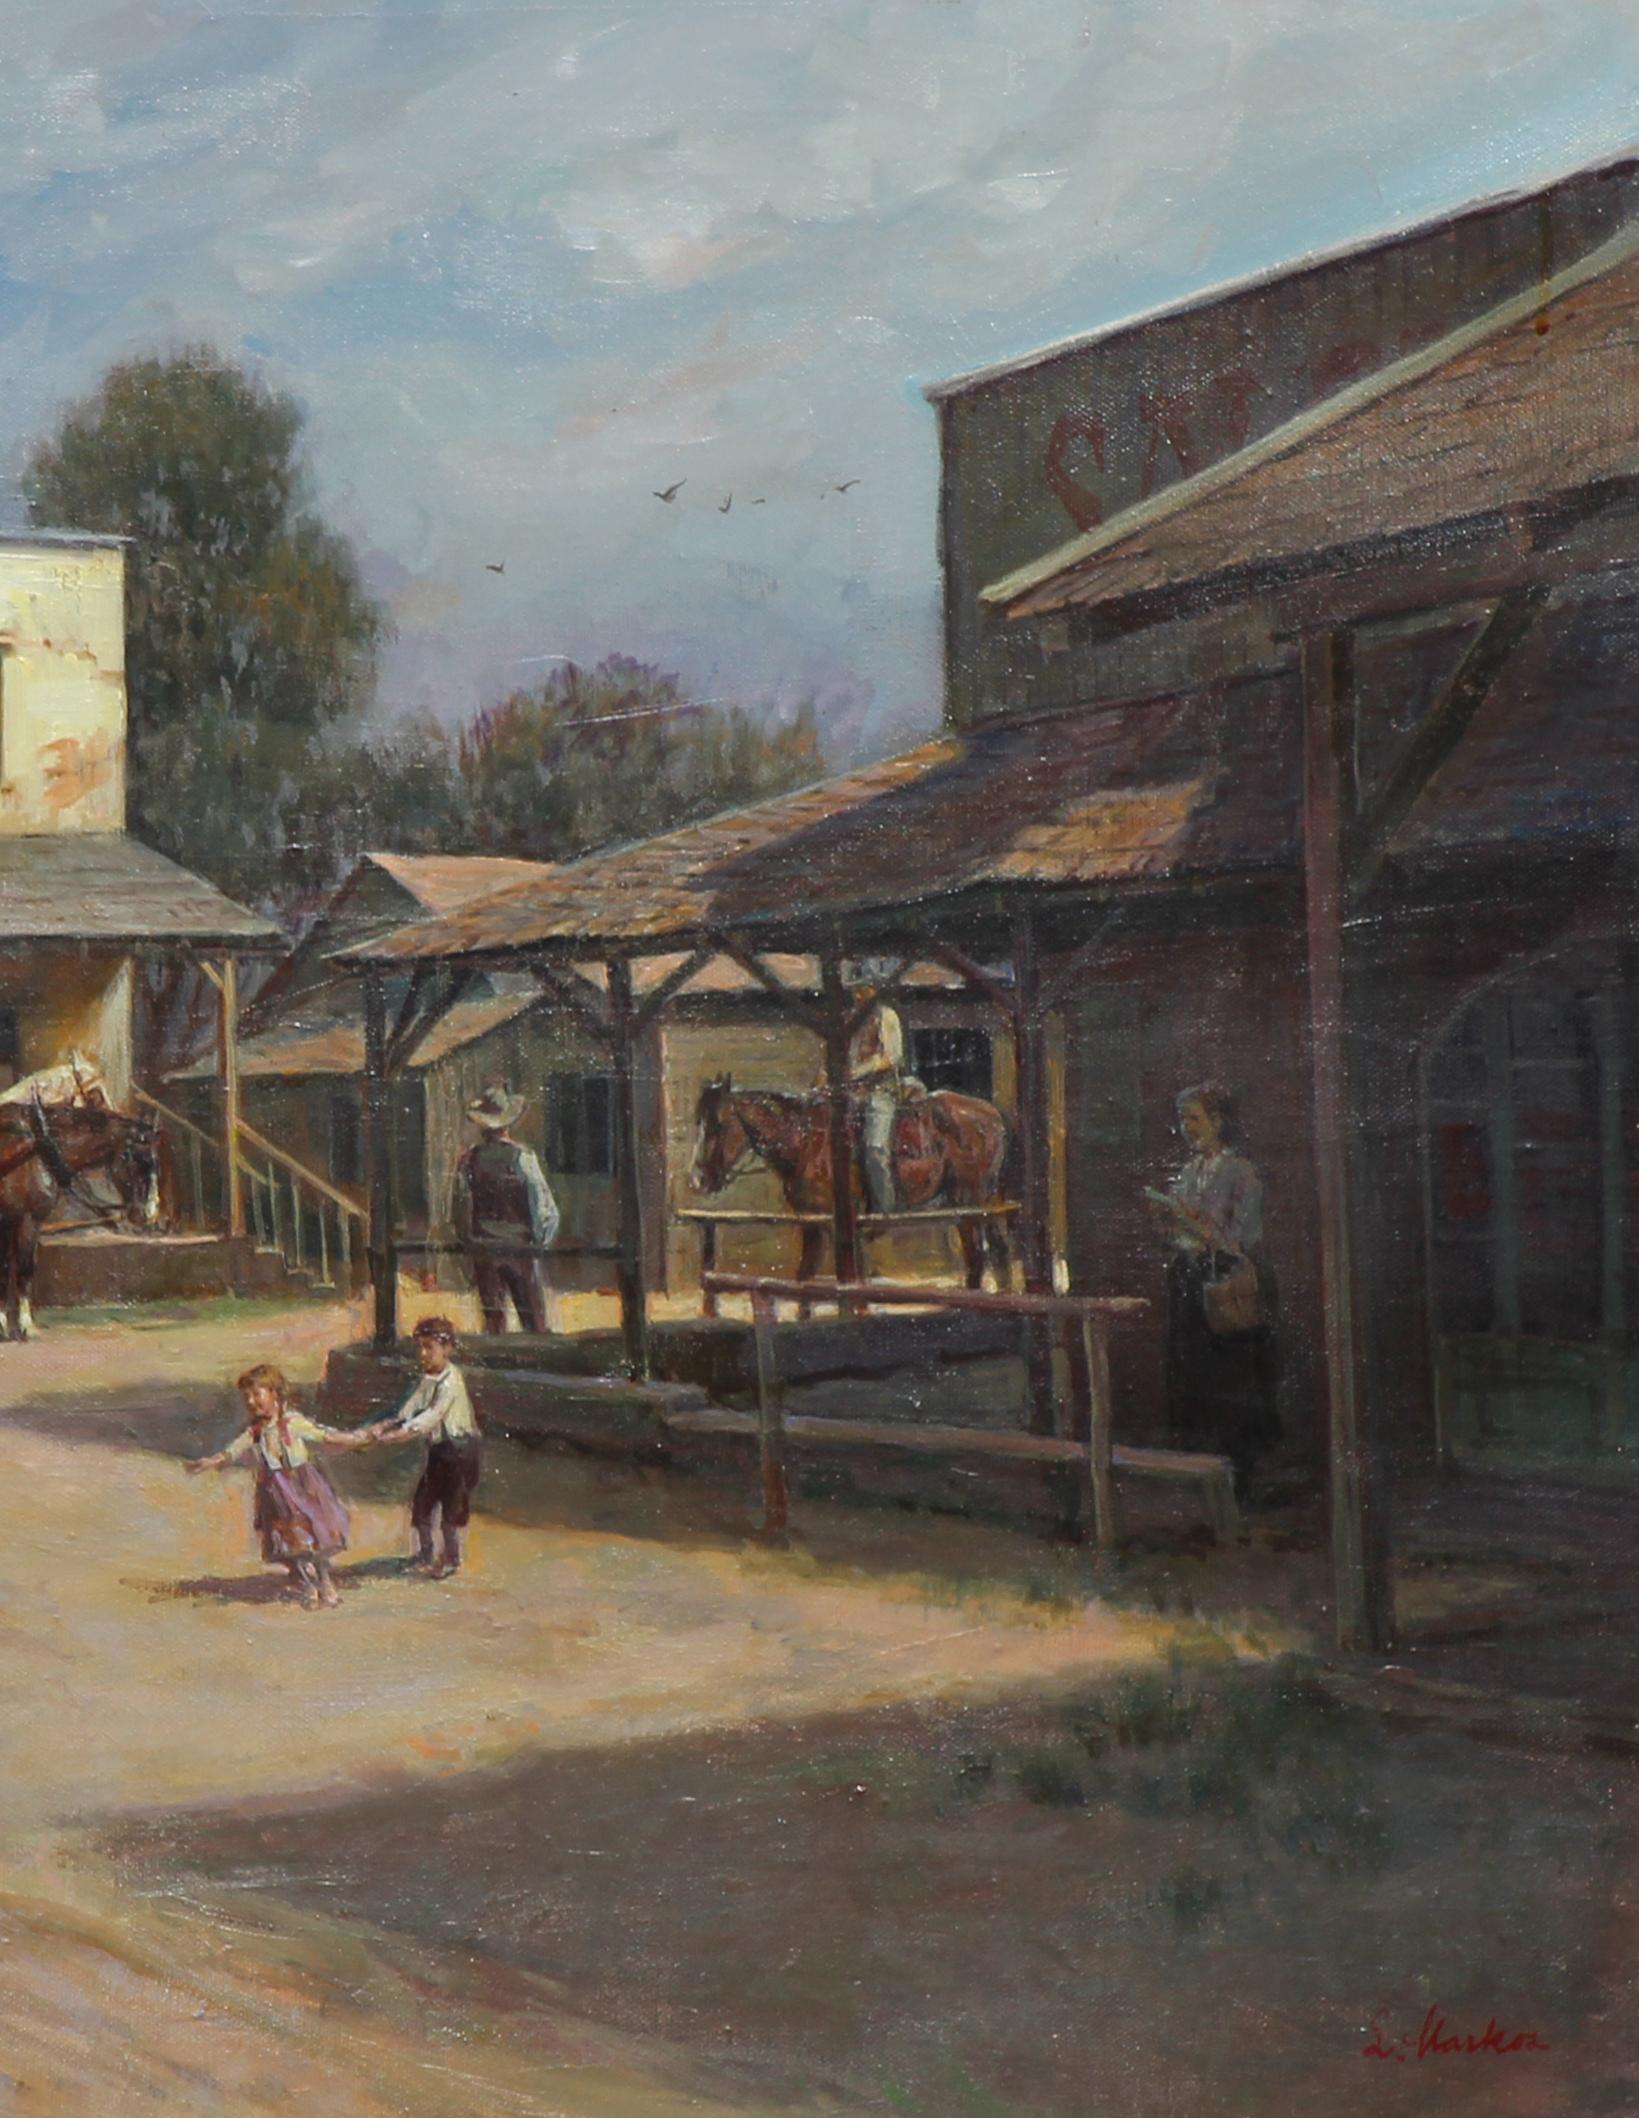 Play Time is an oil painting by Lajos Markos that depicts a small idyllic Western frontier town.

Career
Lajos Markos came to the United States following World War II and worked as a portrait painter in New York City, painting celebrities such as